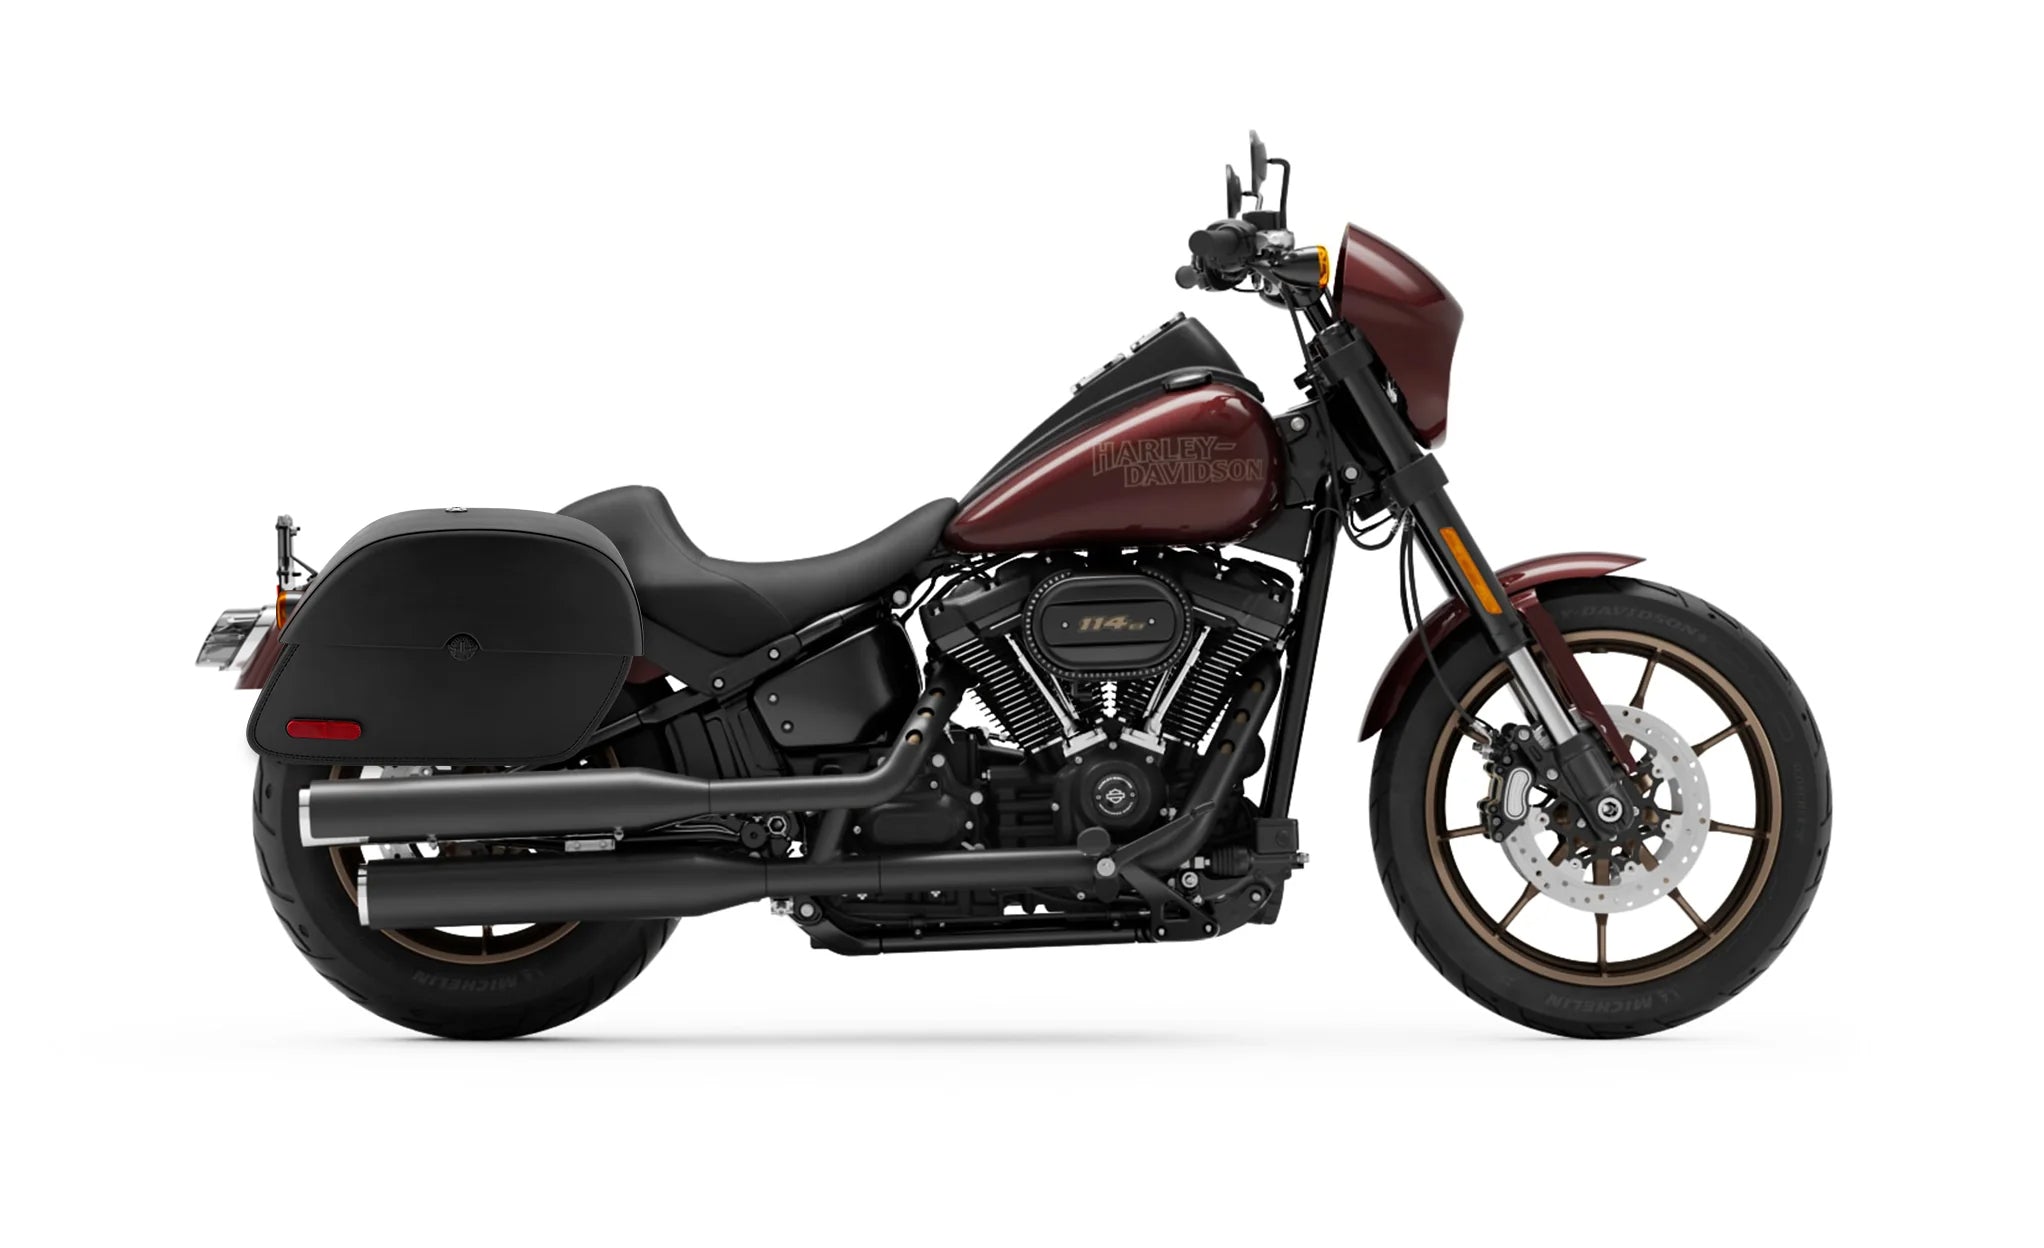 Viking Panzer Large Leather Motorcycle Saddlebags For Harley Davidson Softail Low Rider S Fxlrs on Bike Photo @expand